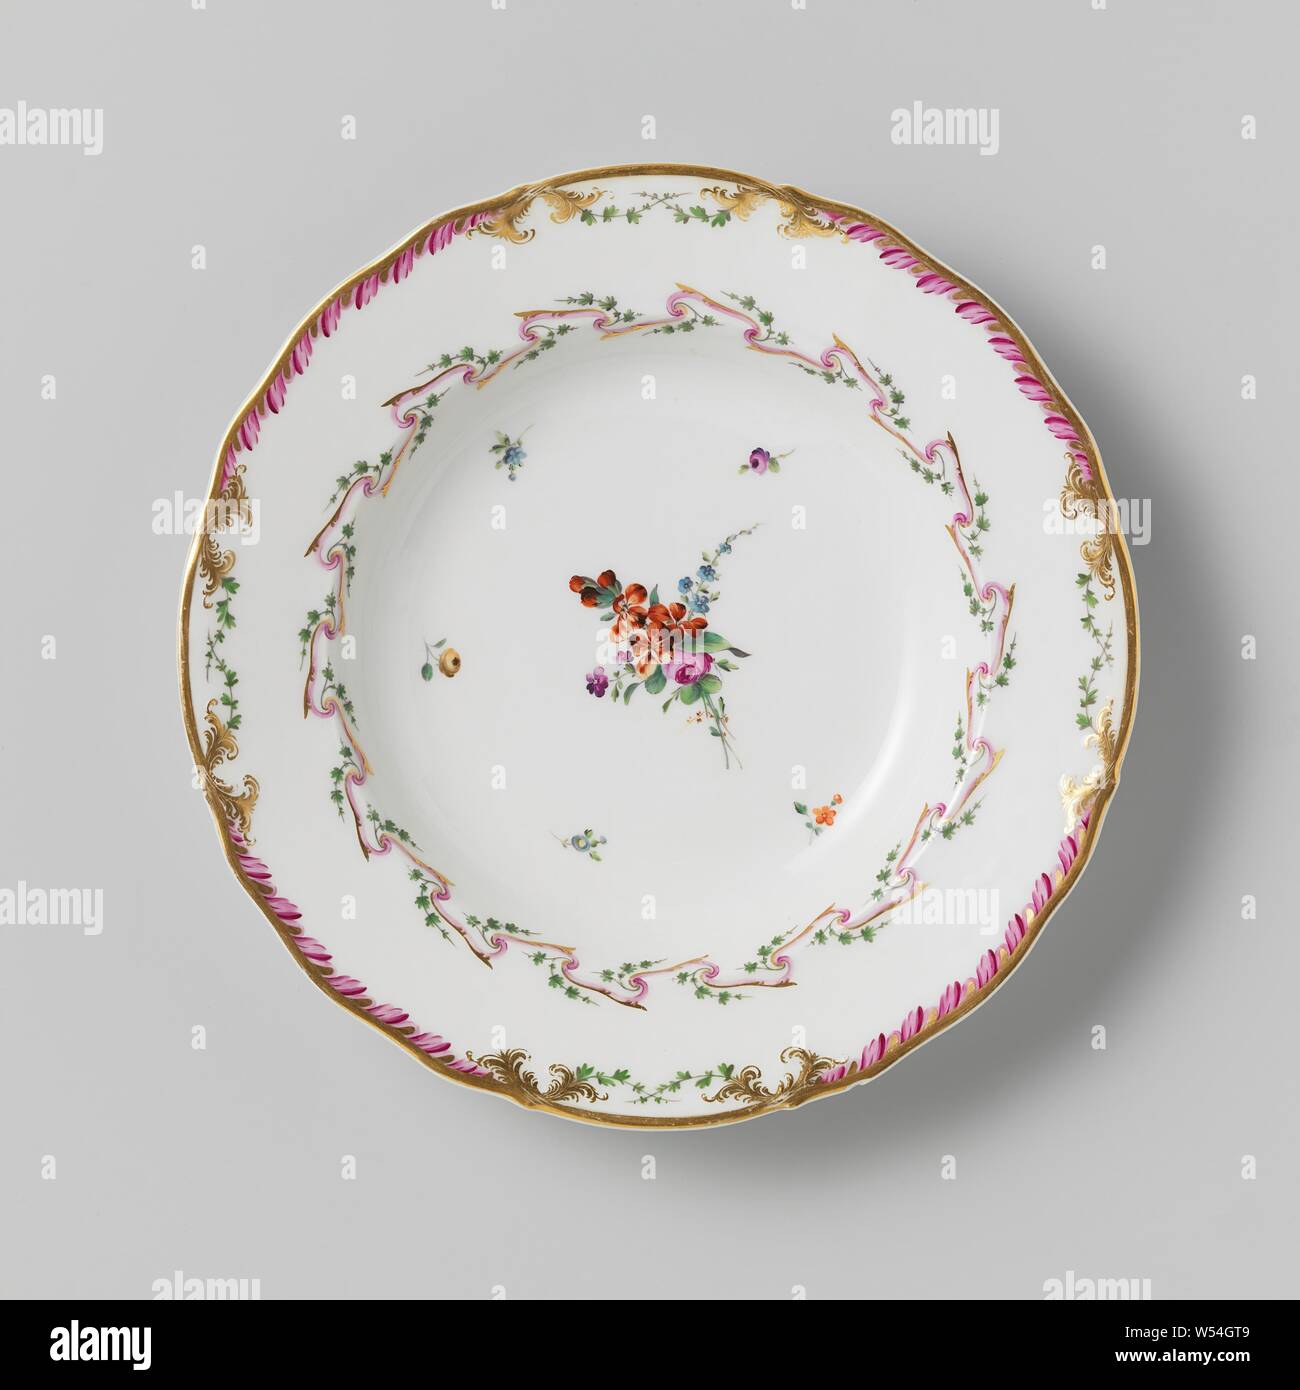 Plate, deep model, belonging to a service with a slung ribbon motif with leaves, flower bouquets and scattered flower branches, belonging to a porcelain service with slung ribbon motif in purple and gold with green leaves, flower bouquets and scattered flower branches. Borders slightly corrugated with decoration in gold with a purple leaf motif between which green crossed leaf motif. Marked: Mf. THE DIHL ET GUERHARD à PARIS. Series of eleven pieces., Dihl et Guerhard, Amsterdam, 1780 - in or before 1820, porcelain (material), h 4 cm × d 24.5 cm Stock Photo